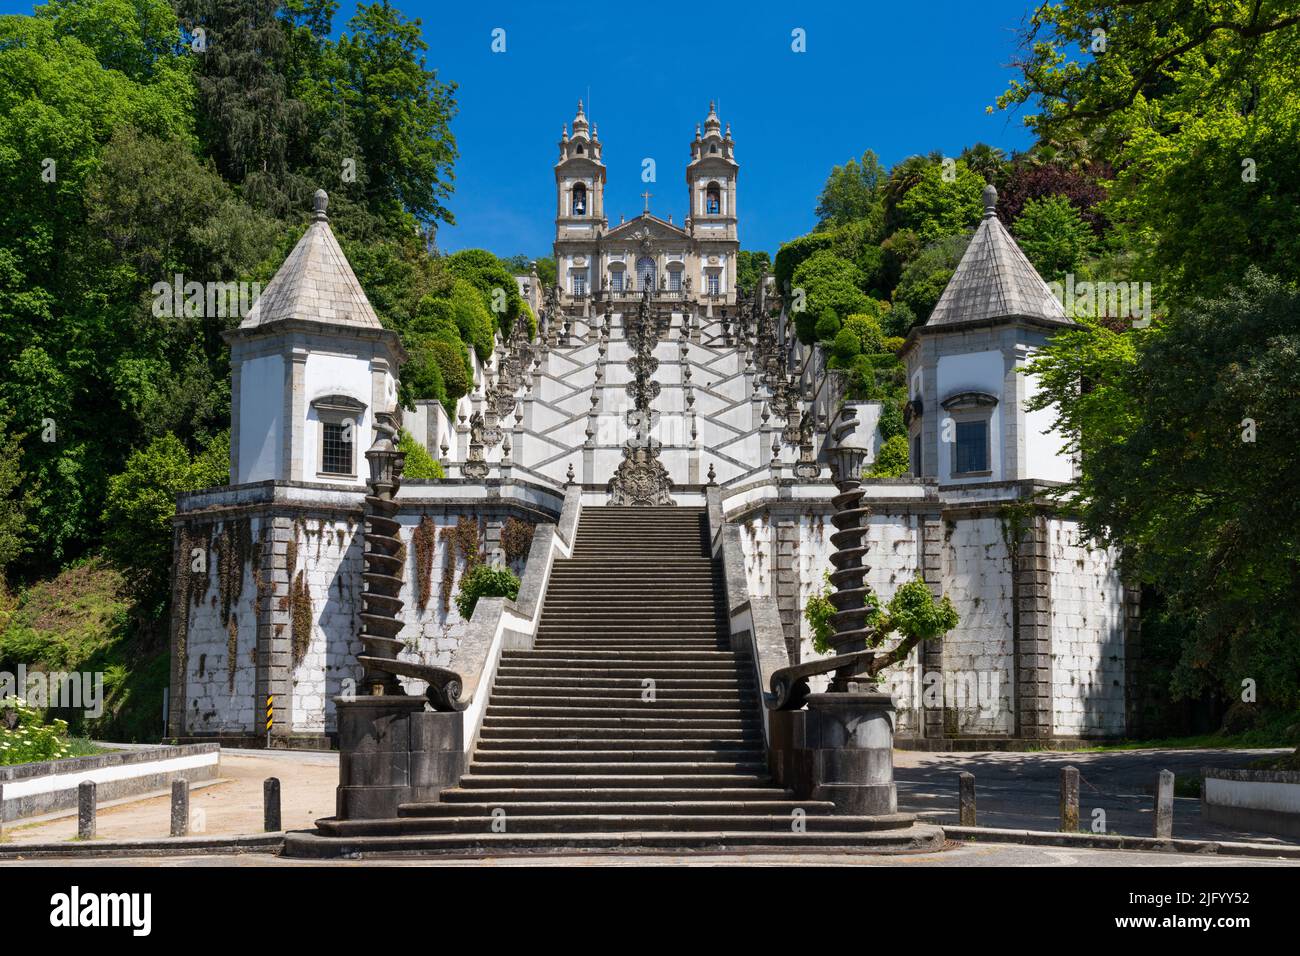 Basilica and famous staircases of Bom Jesus (the Good Jesus), in the city of Braga, in the Minho Region of Portugal, Europe Stock Photo